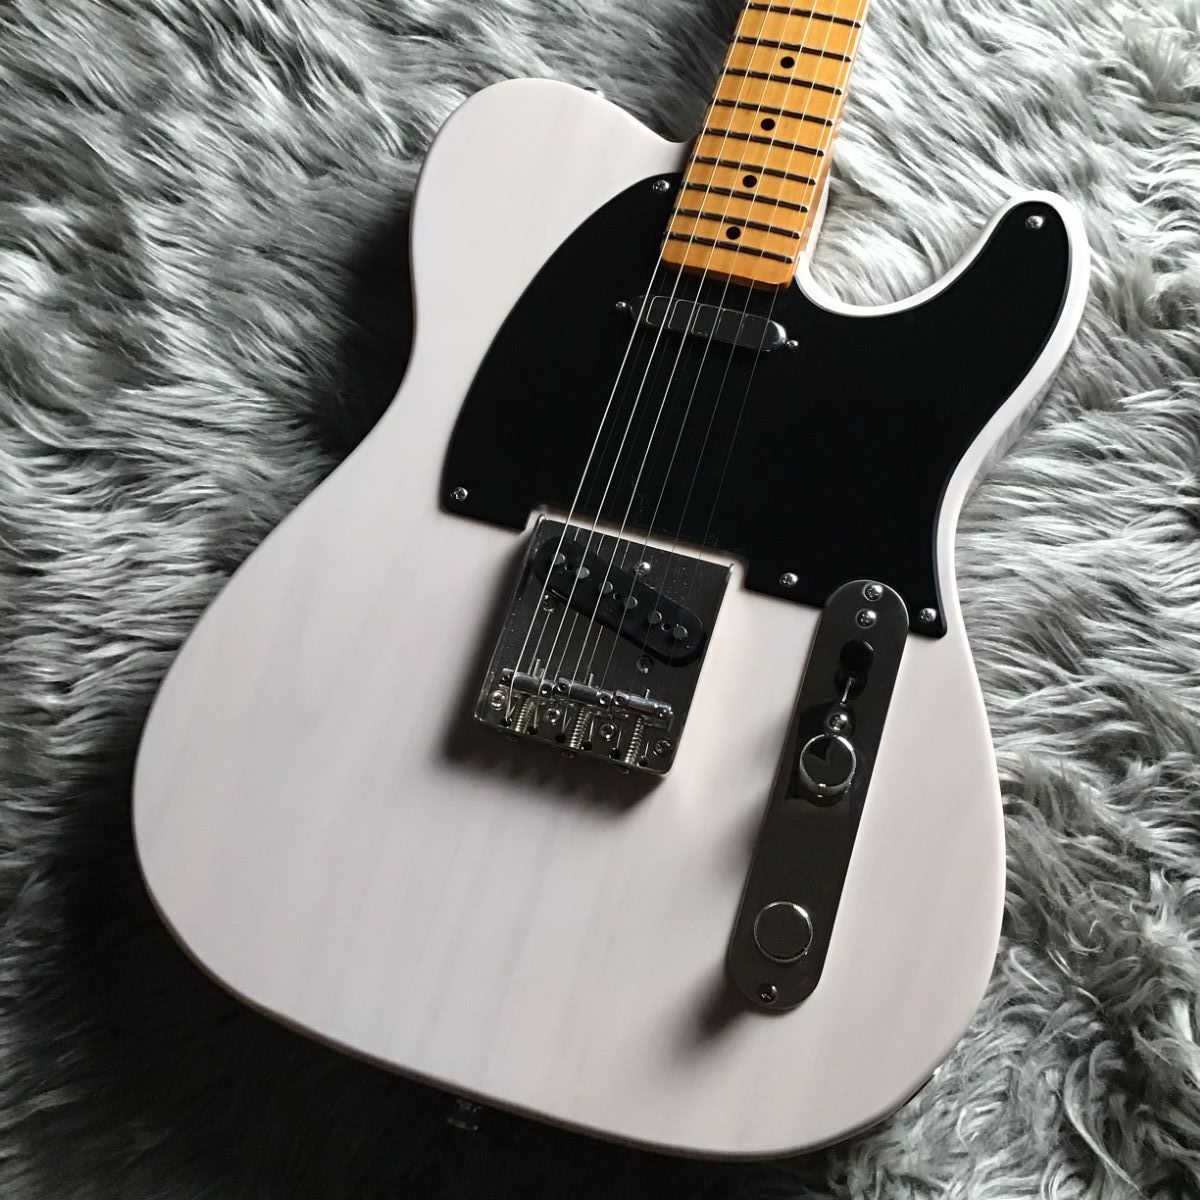 Squier Squier by Fender / Classic Vibe 50s Telecaster Maple Fingerboard White Blonde エレキギター テレキャスター